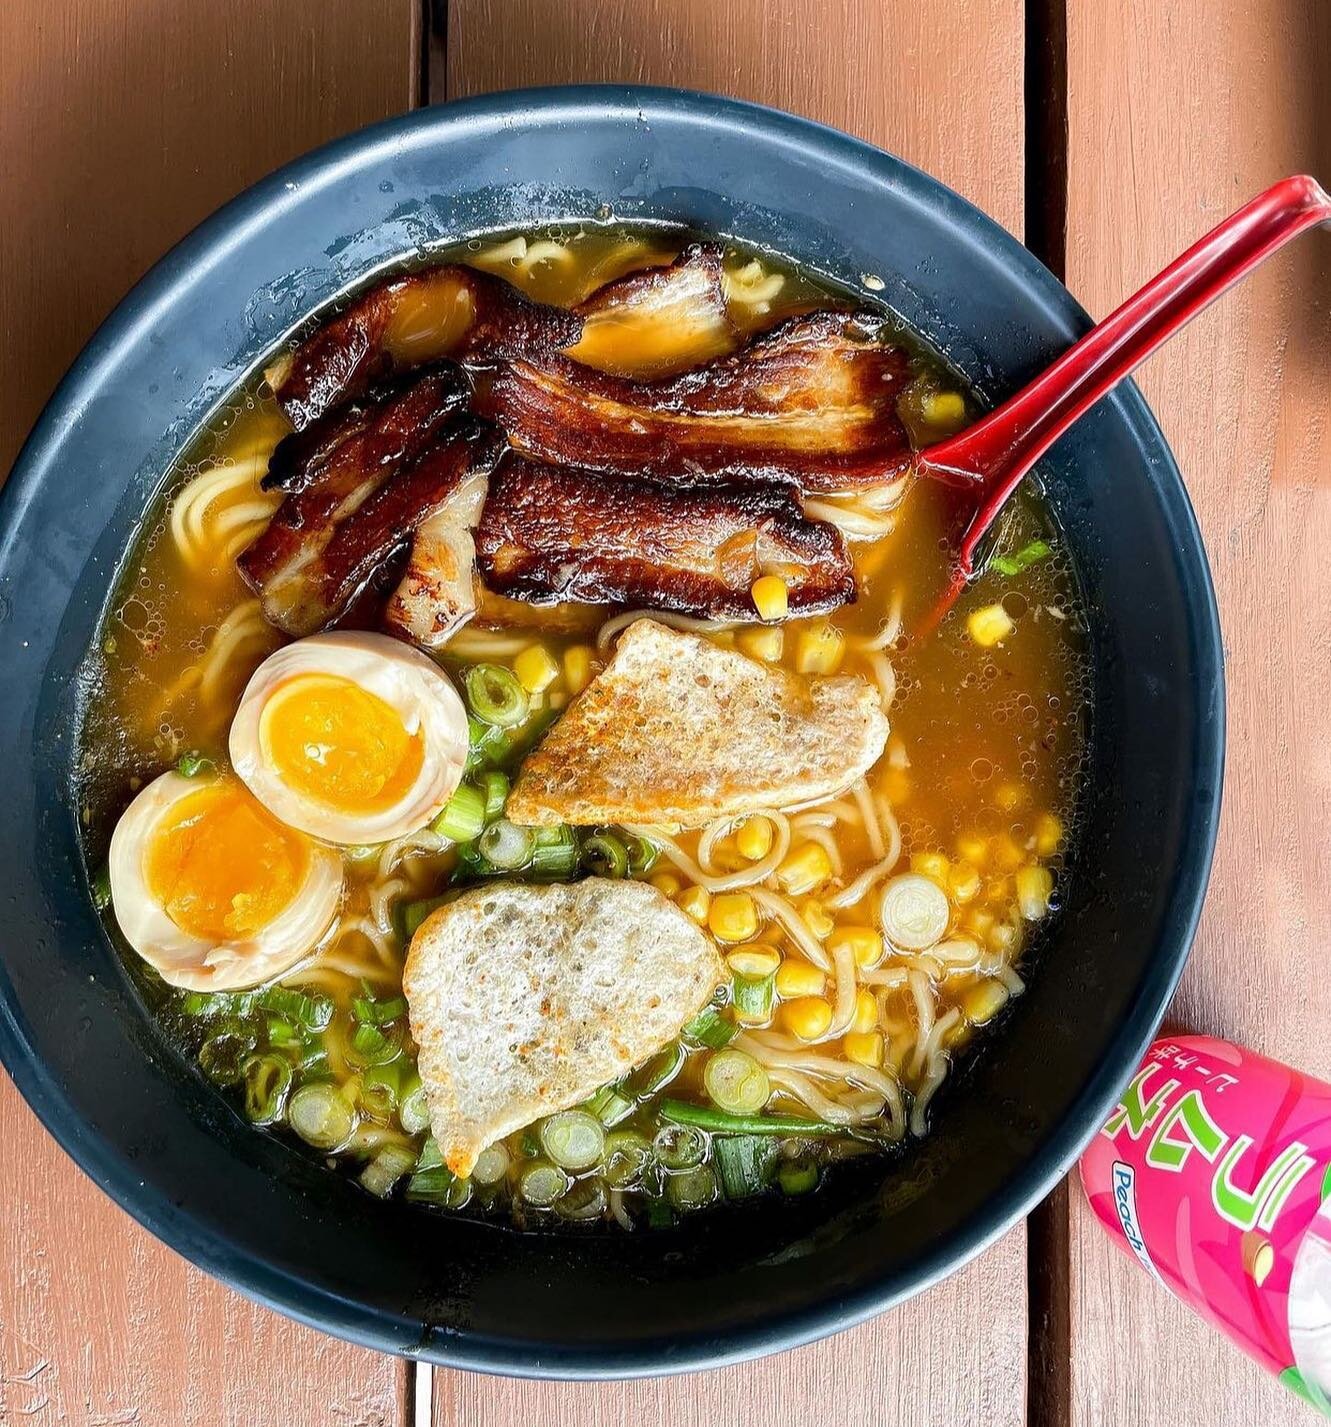 Chilly weather calls for warm ramen!
Local hot spot @kumabowls is known for their traditional ramen and as a favorite sushi spot for locals! Add this to your Outstanding Stay itinerary. 
.
.
.
.
.
.
.
#ramen #lososos #sushi #ca #california #centralco